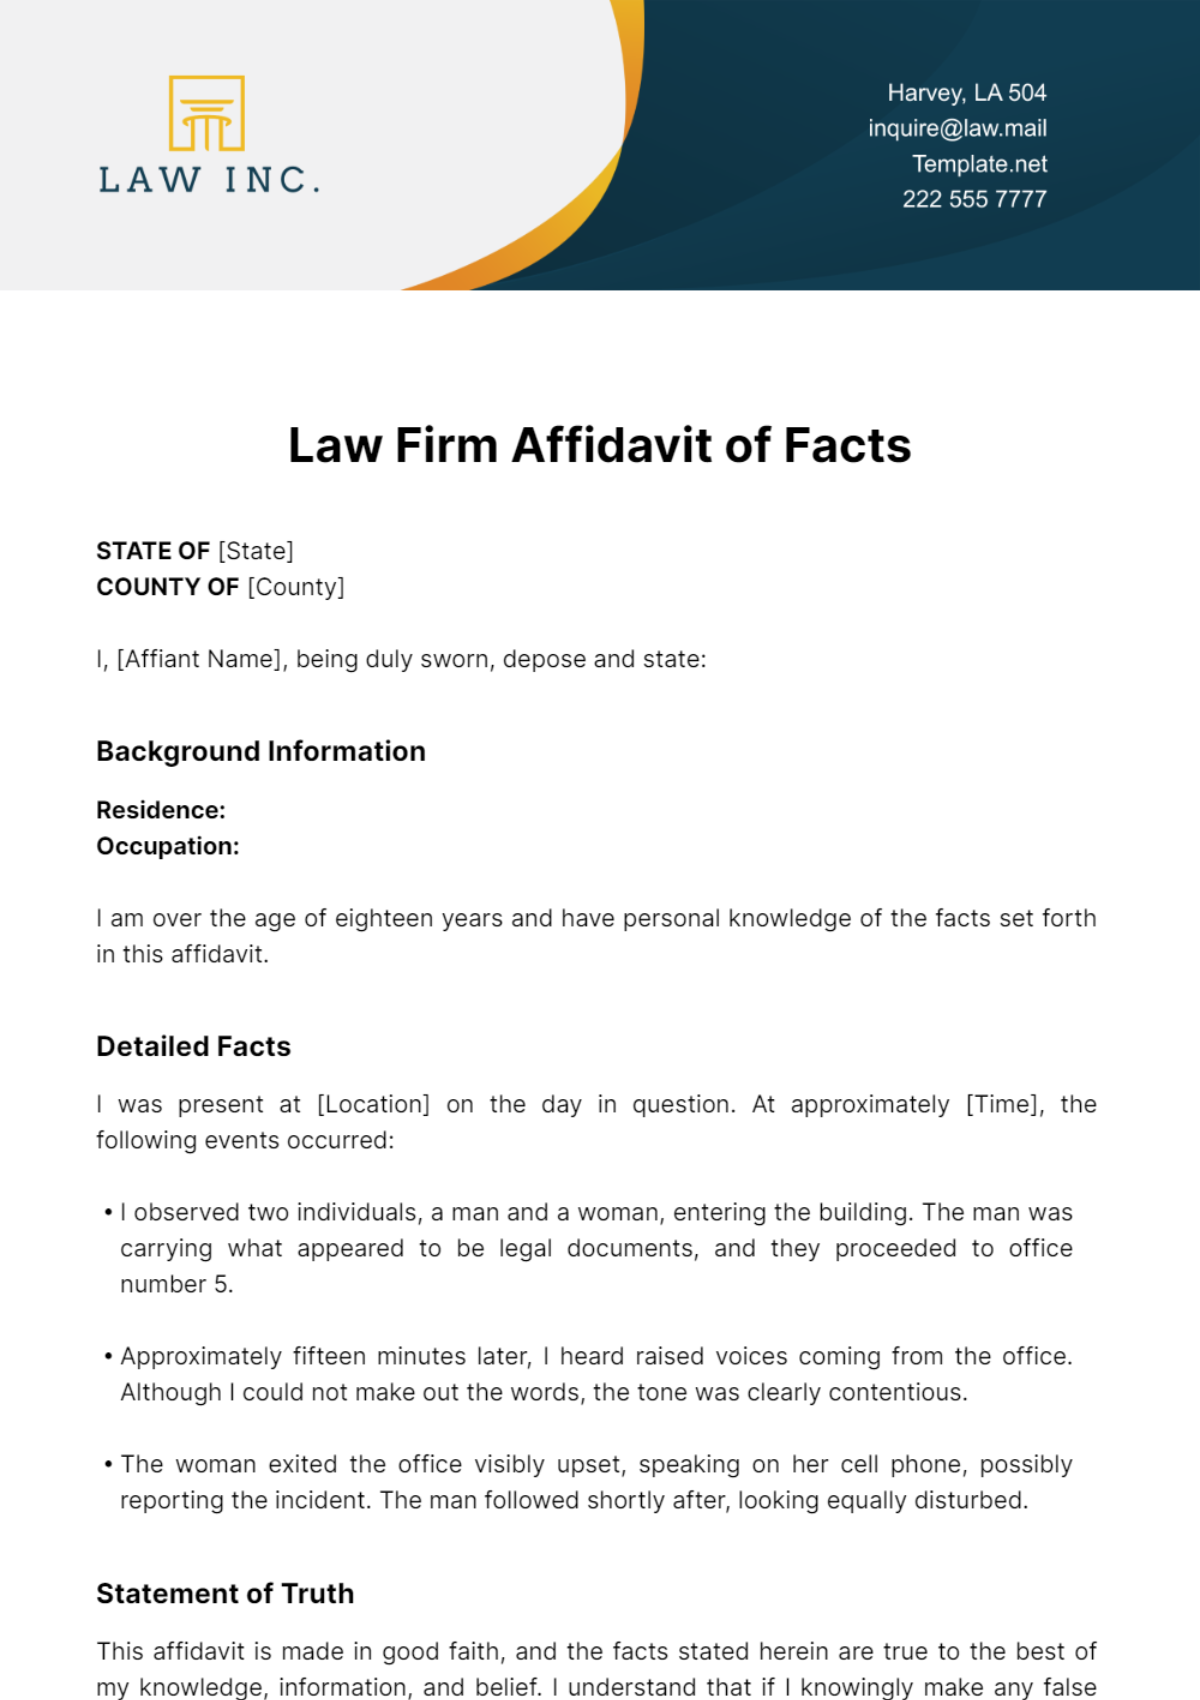 Law Firm Affidavit of Facts Template